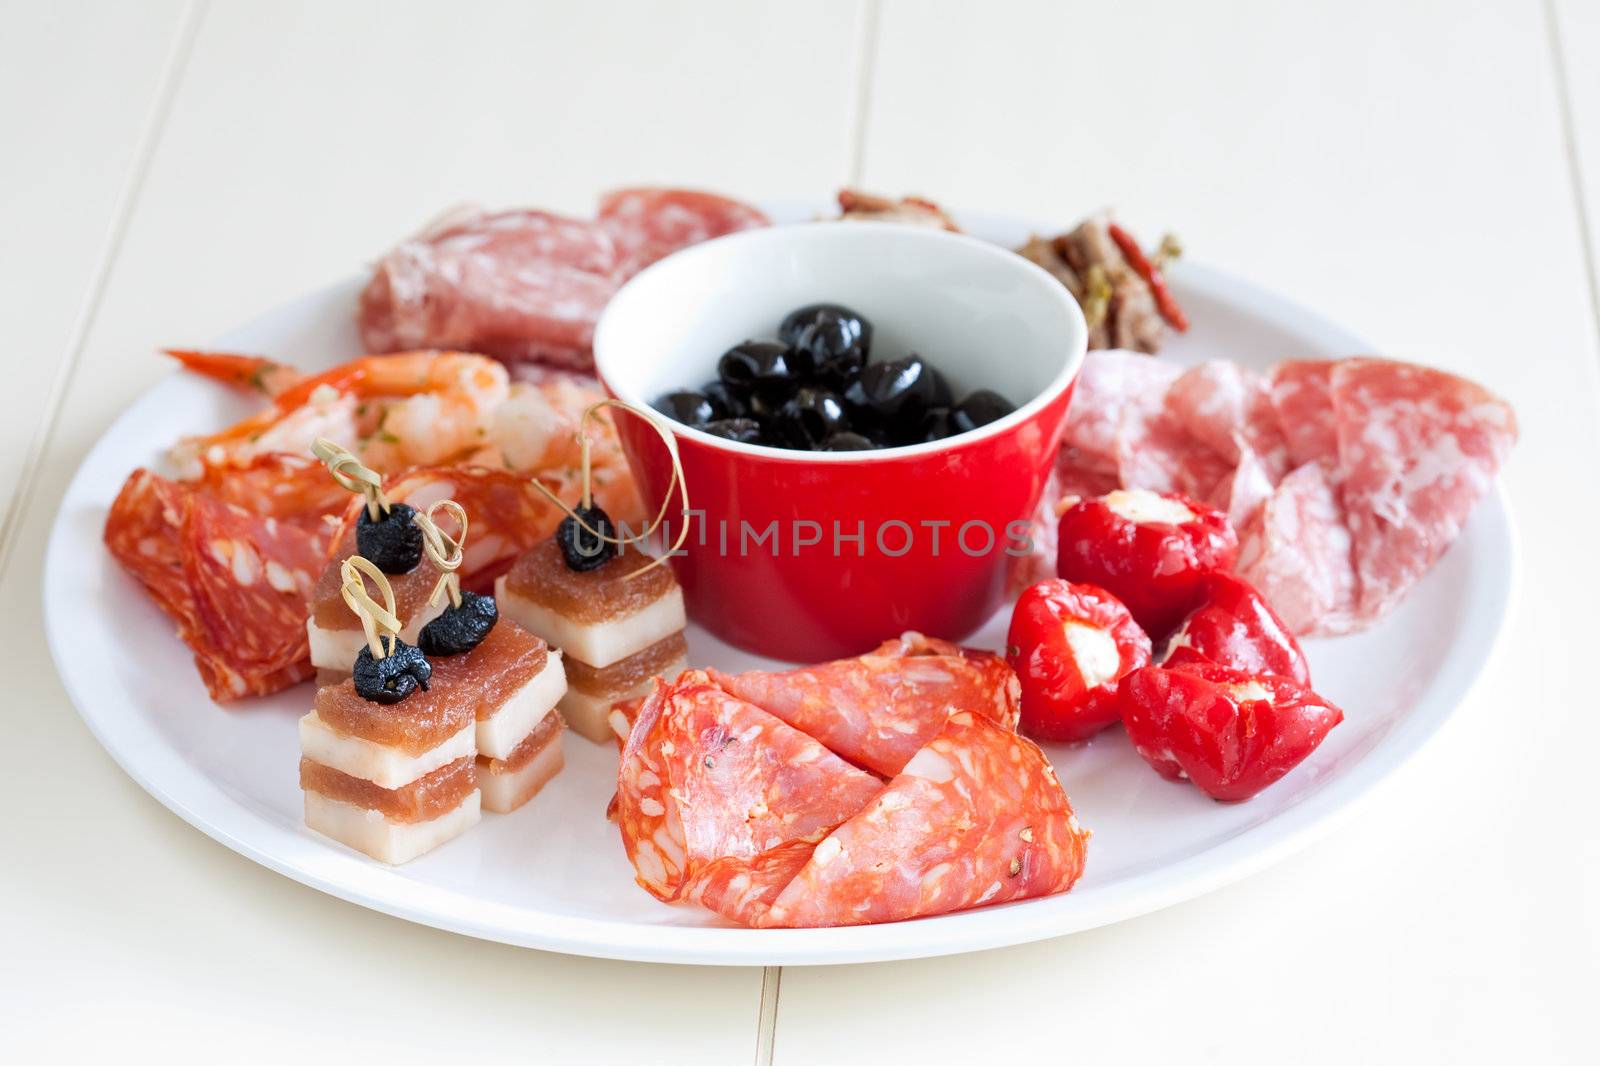 Plate of antipasti with chorizo, cheese, poppers, pepper, salami, and olives